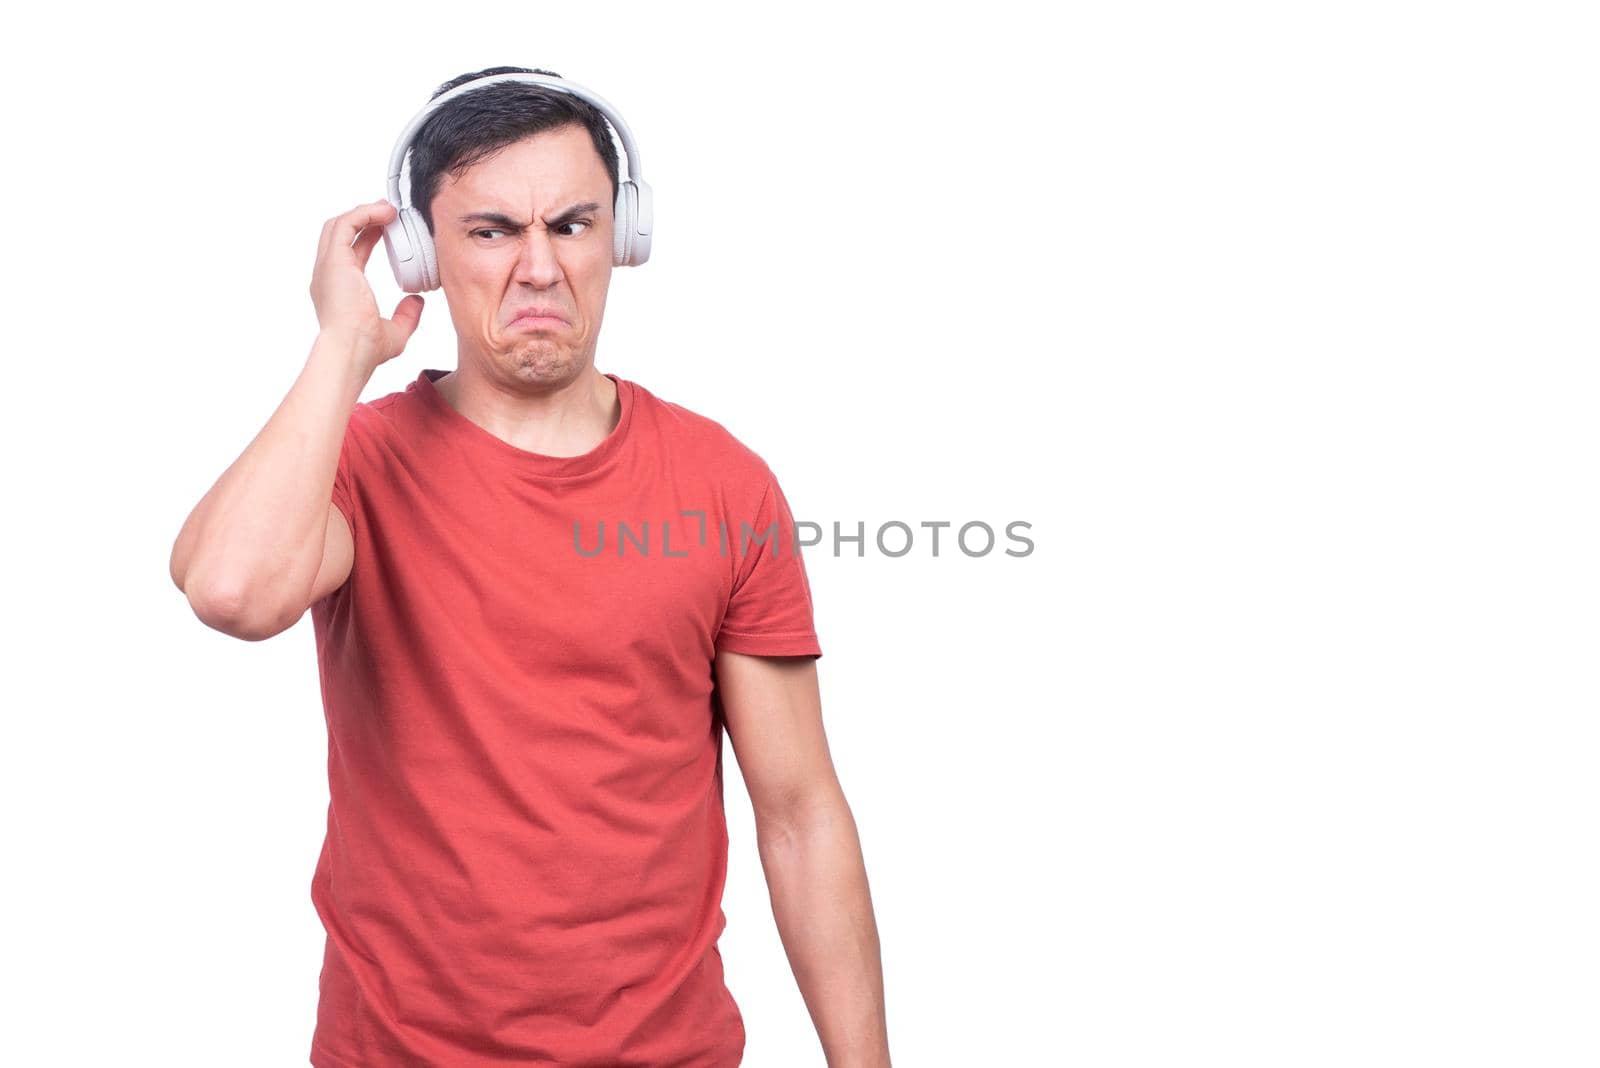 Discontent man in headphones against blank background by ivanmoreno